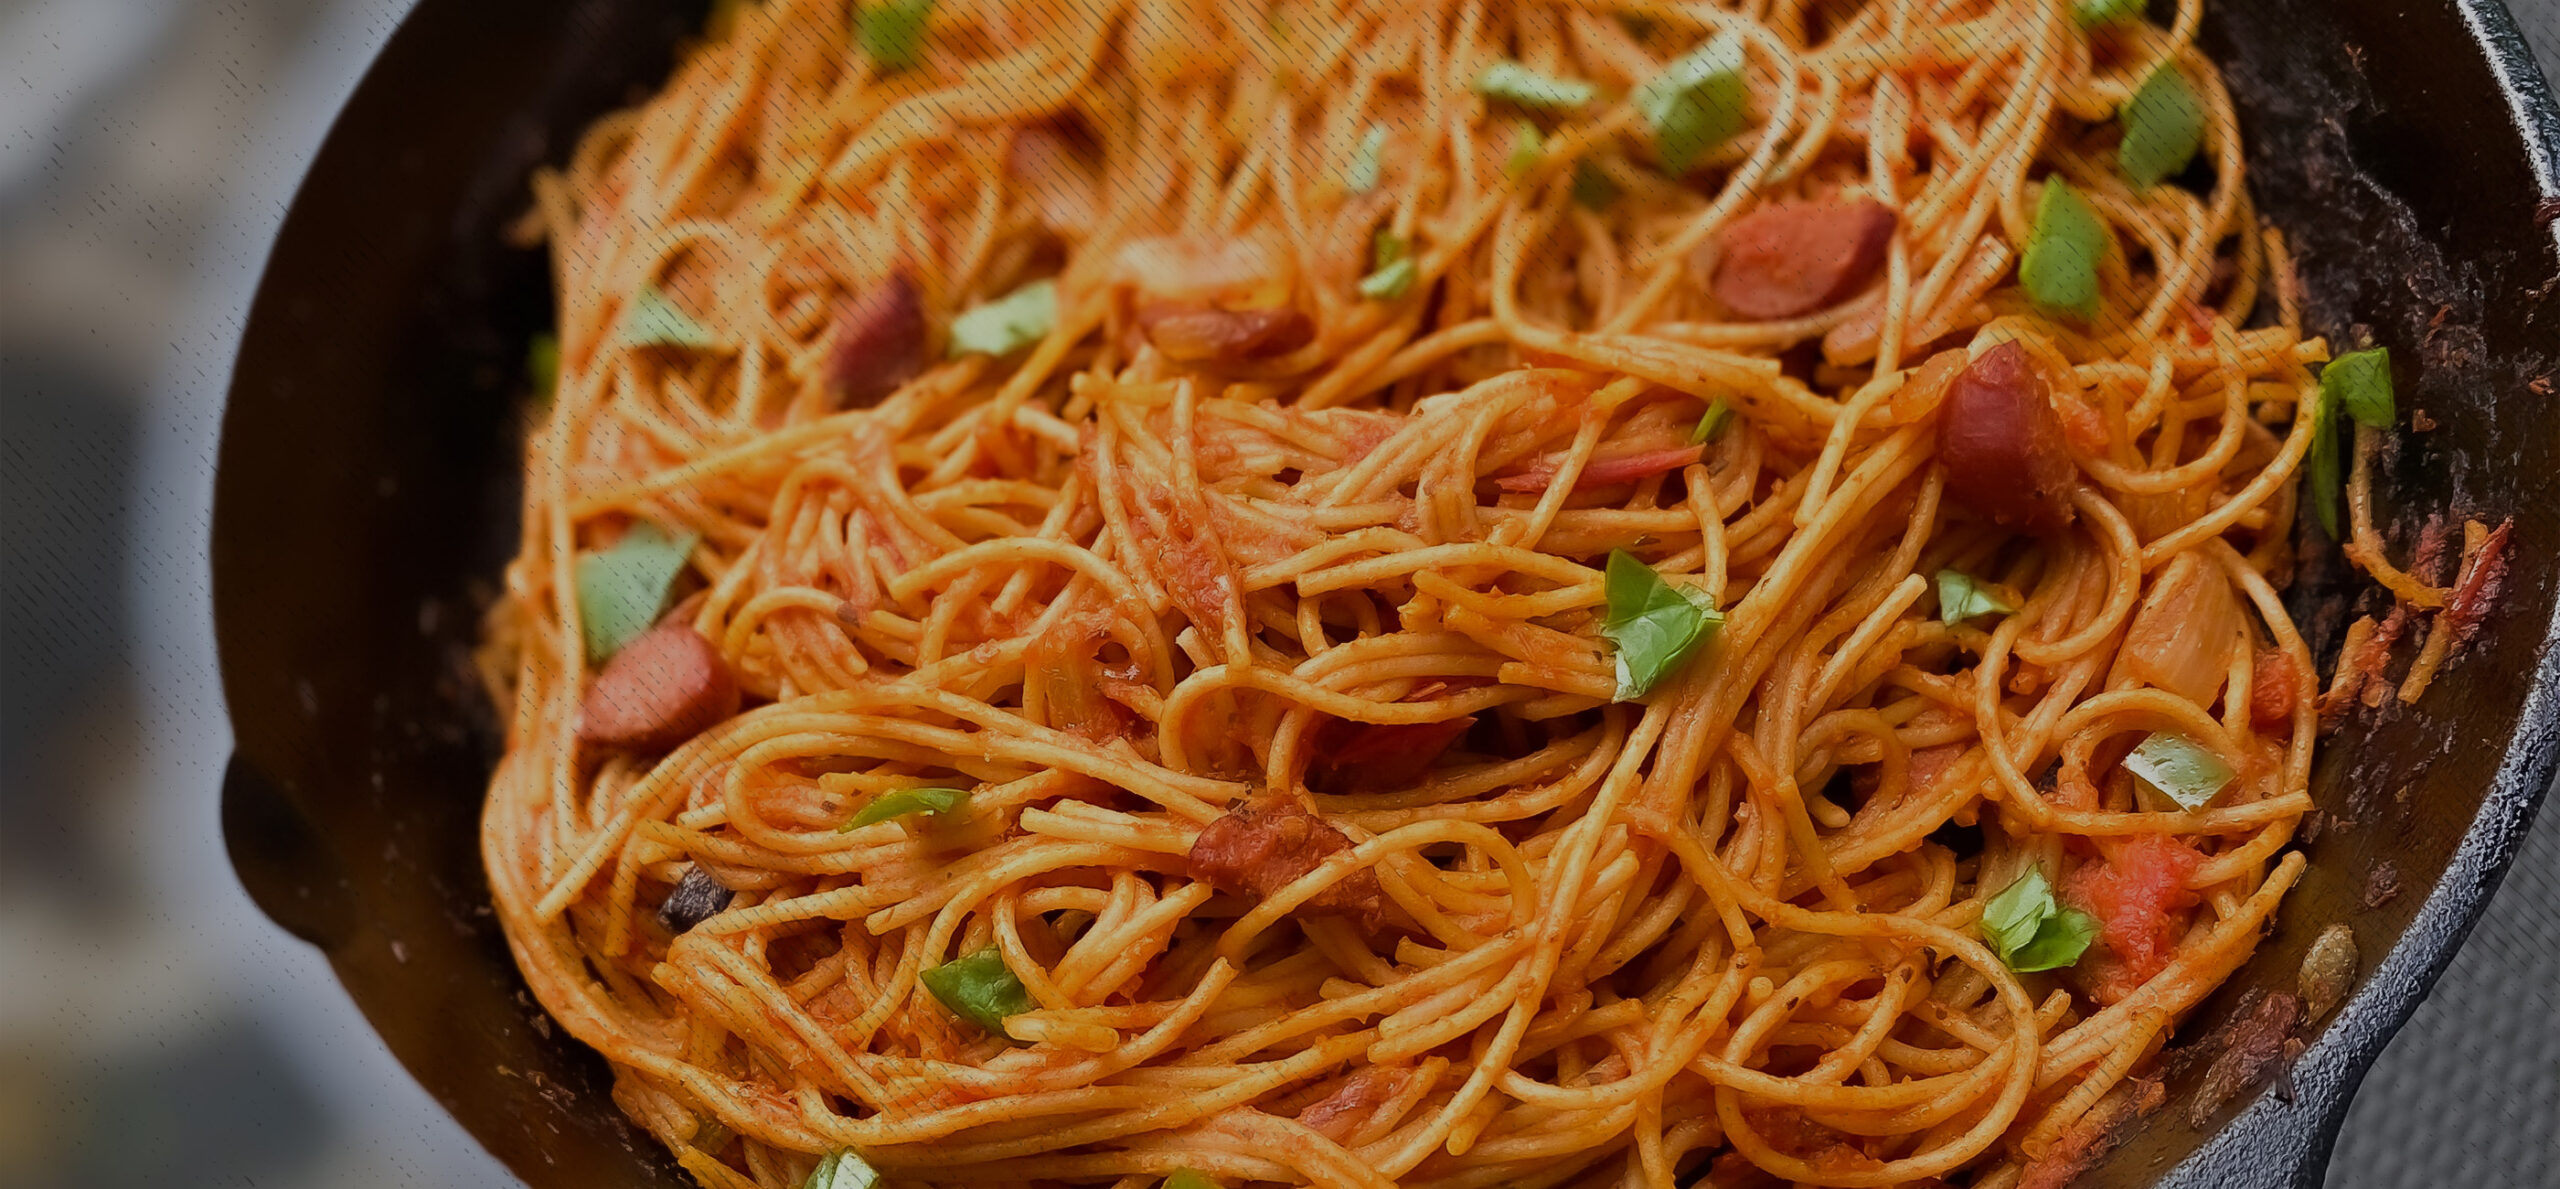 Haitian Style Spaghetti with Beef Hot Dogs